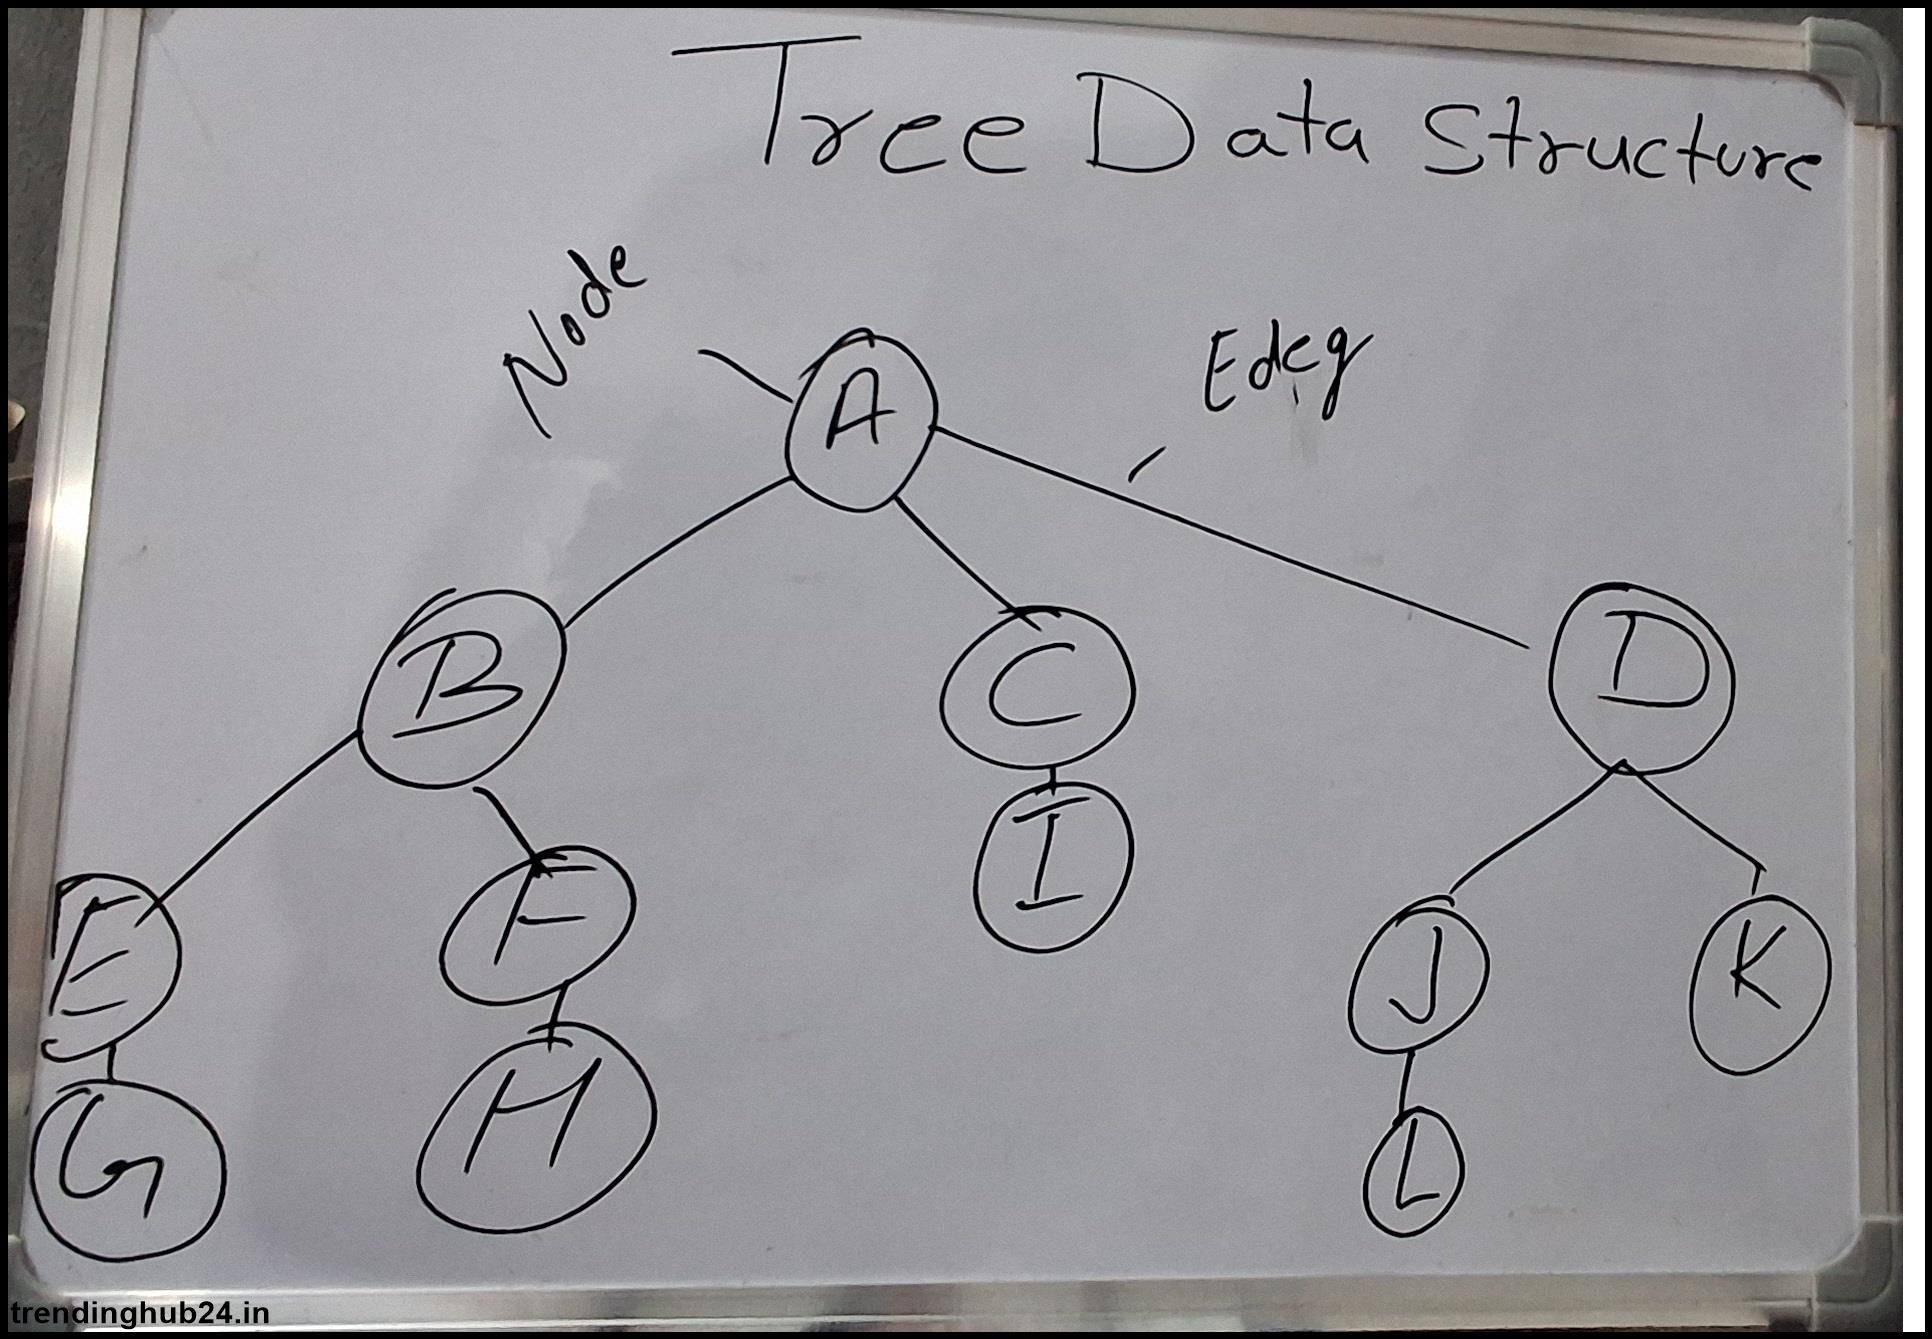 what is the difference between tree and graph data structure 1 2 3 4 5 6 7 8 9 10.jpg